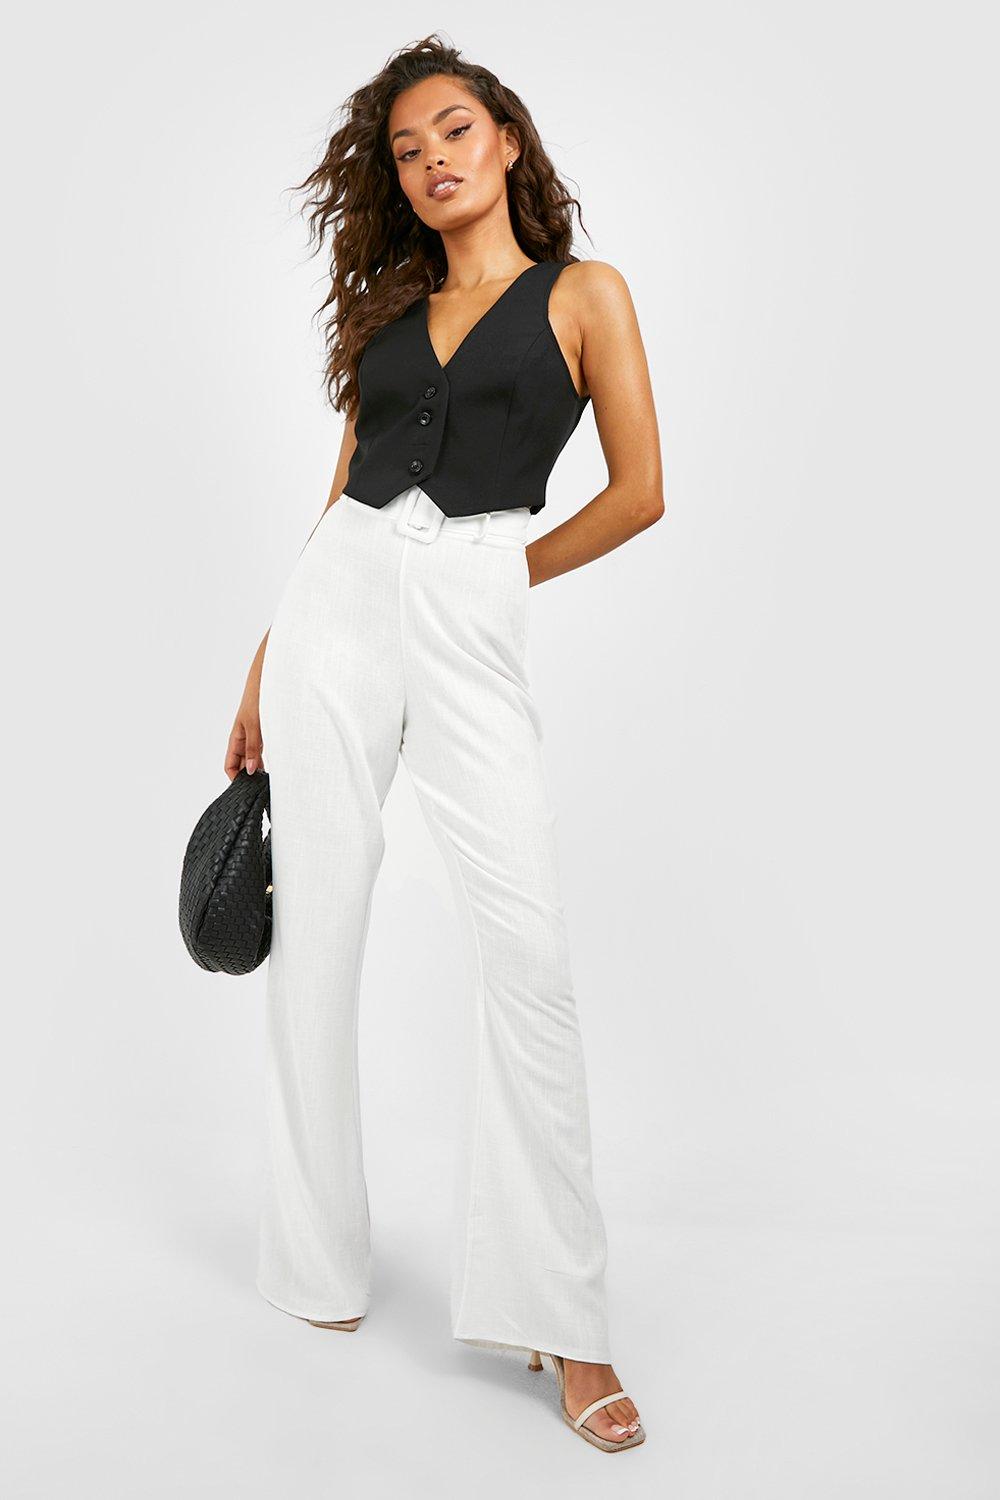 French Connection wide leg linen blend trousers in white | ASOS